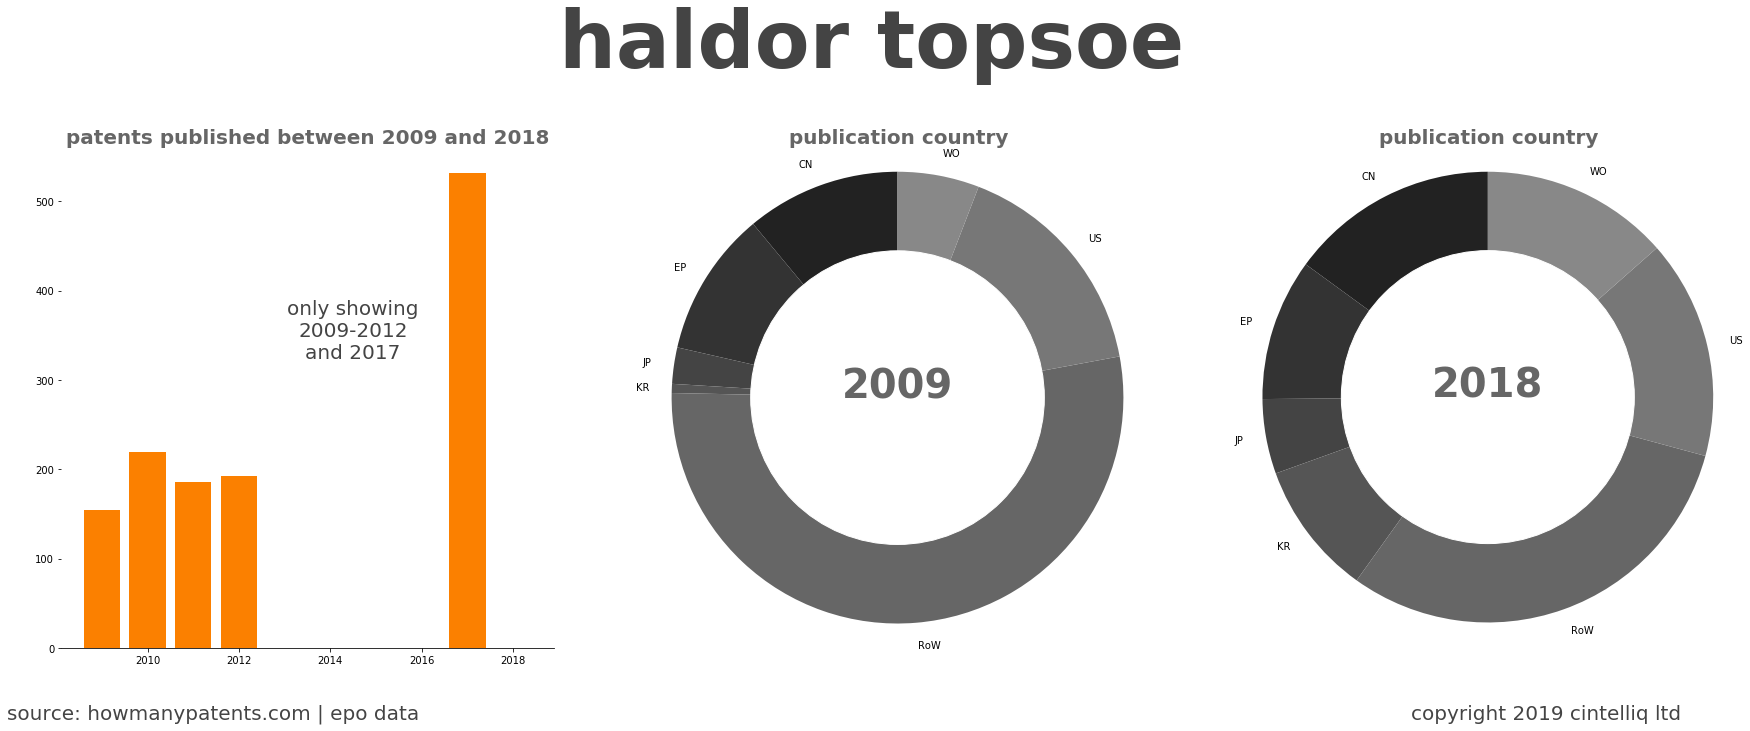 summary of patents for Haldor Topsoe